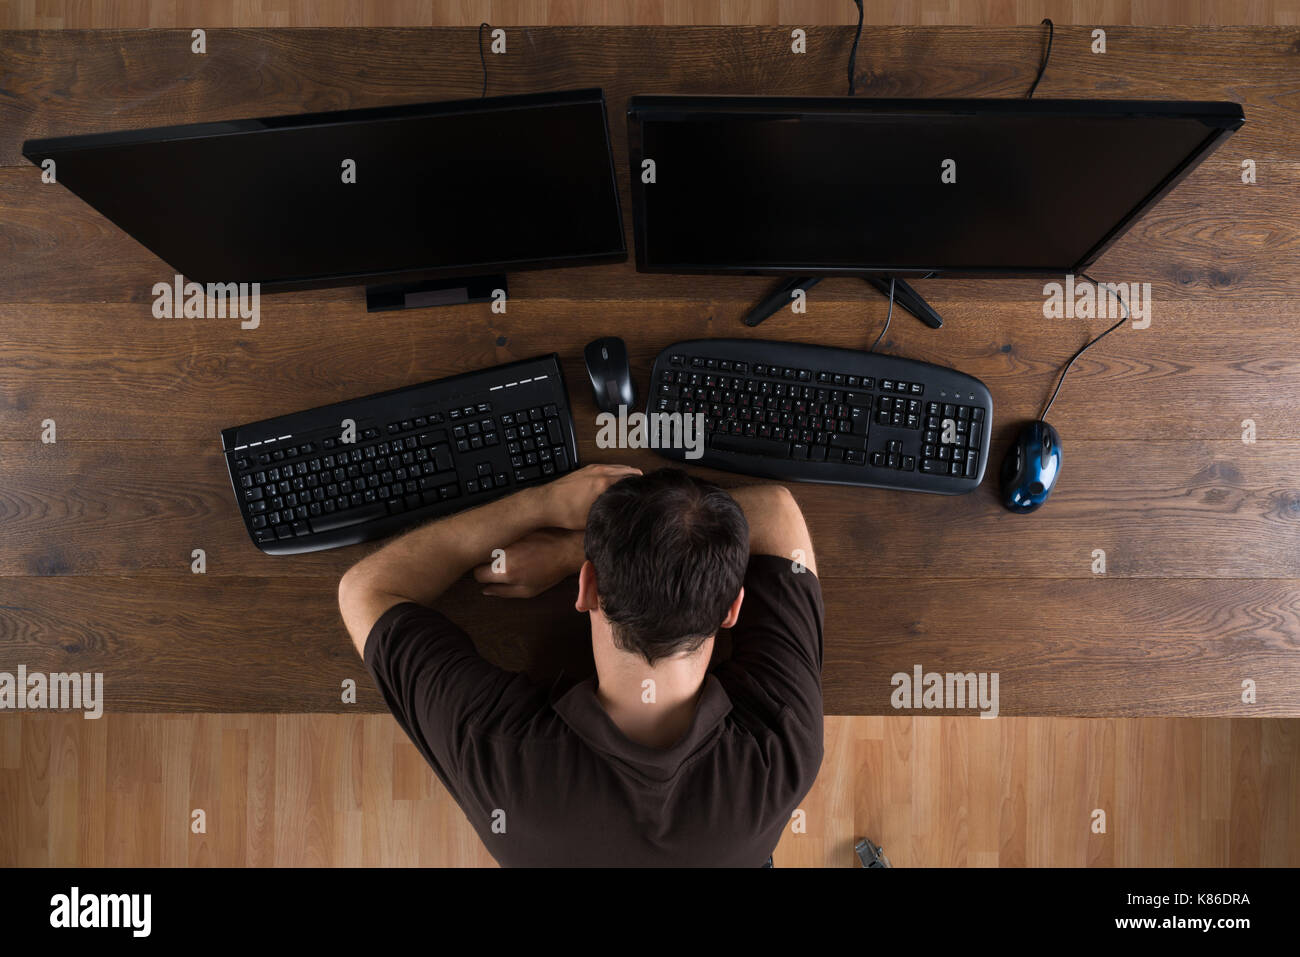 Man Sleeping At Desk With Computers Showing Program Code Stock Photo